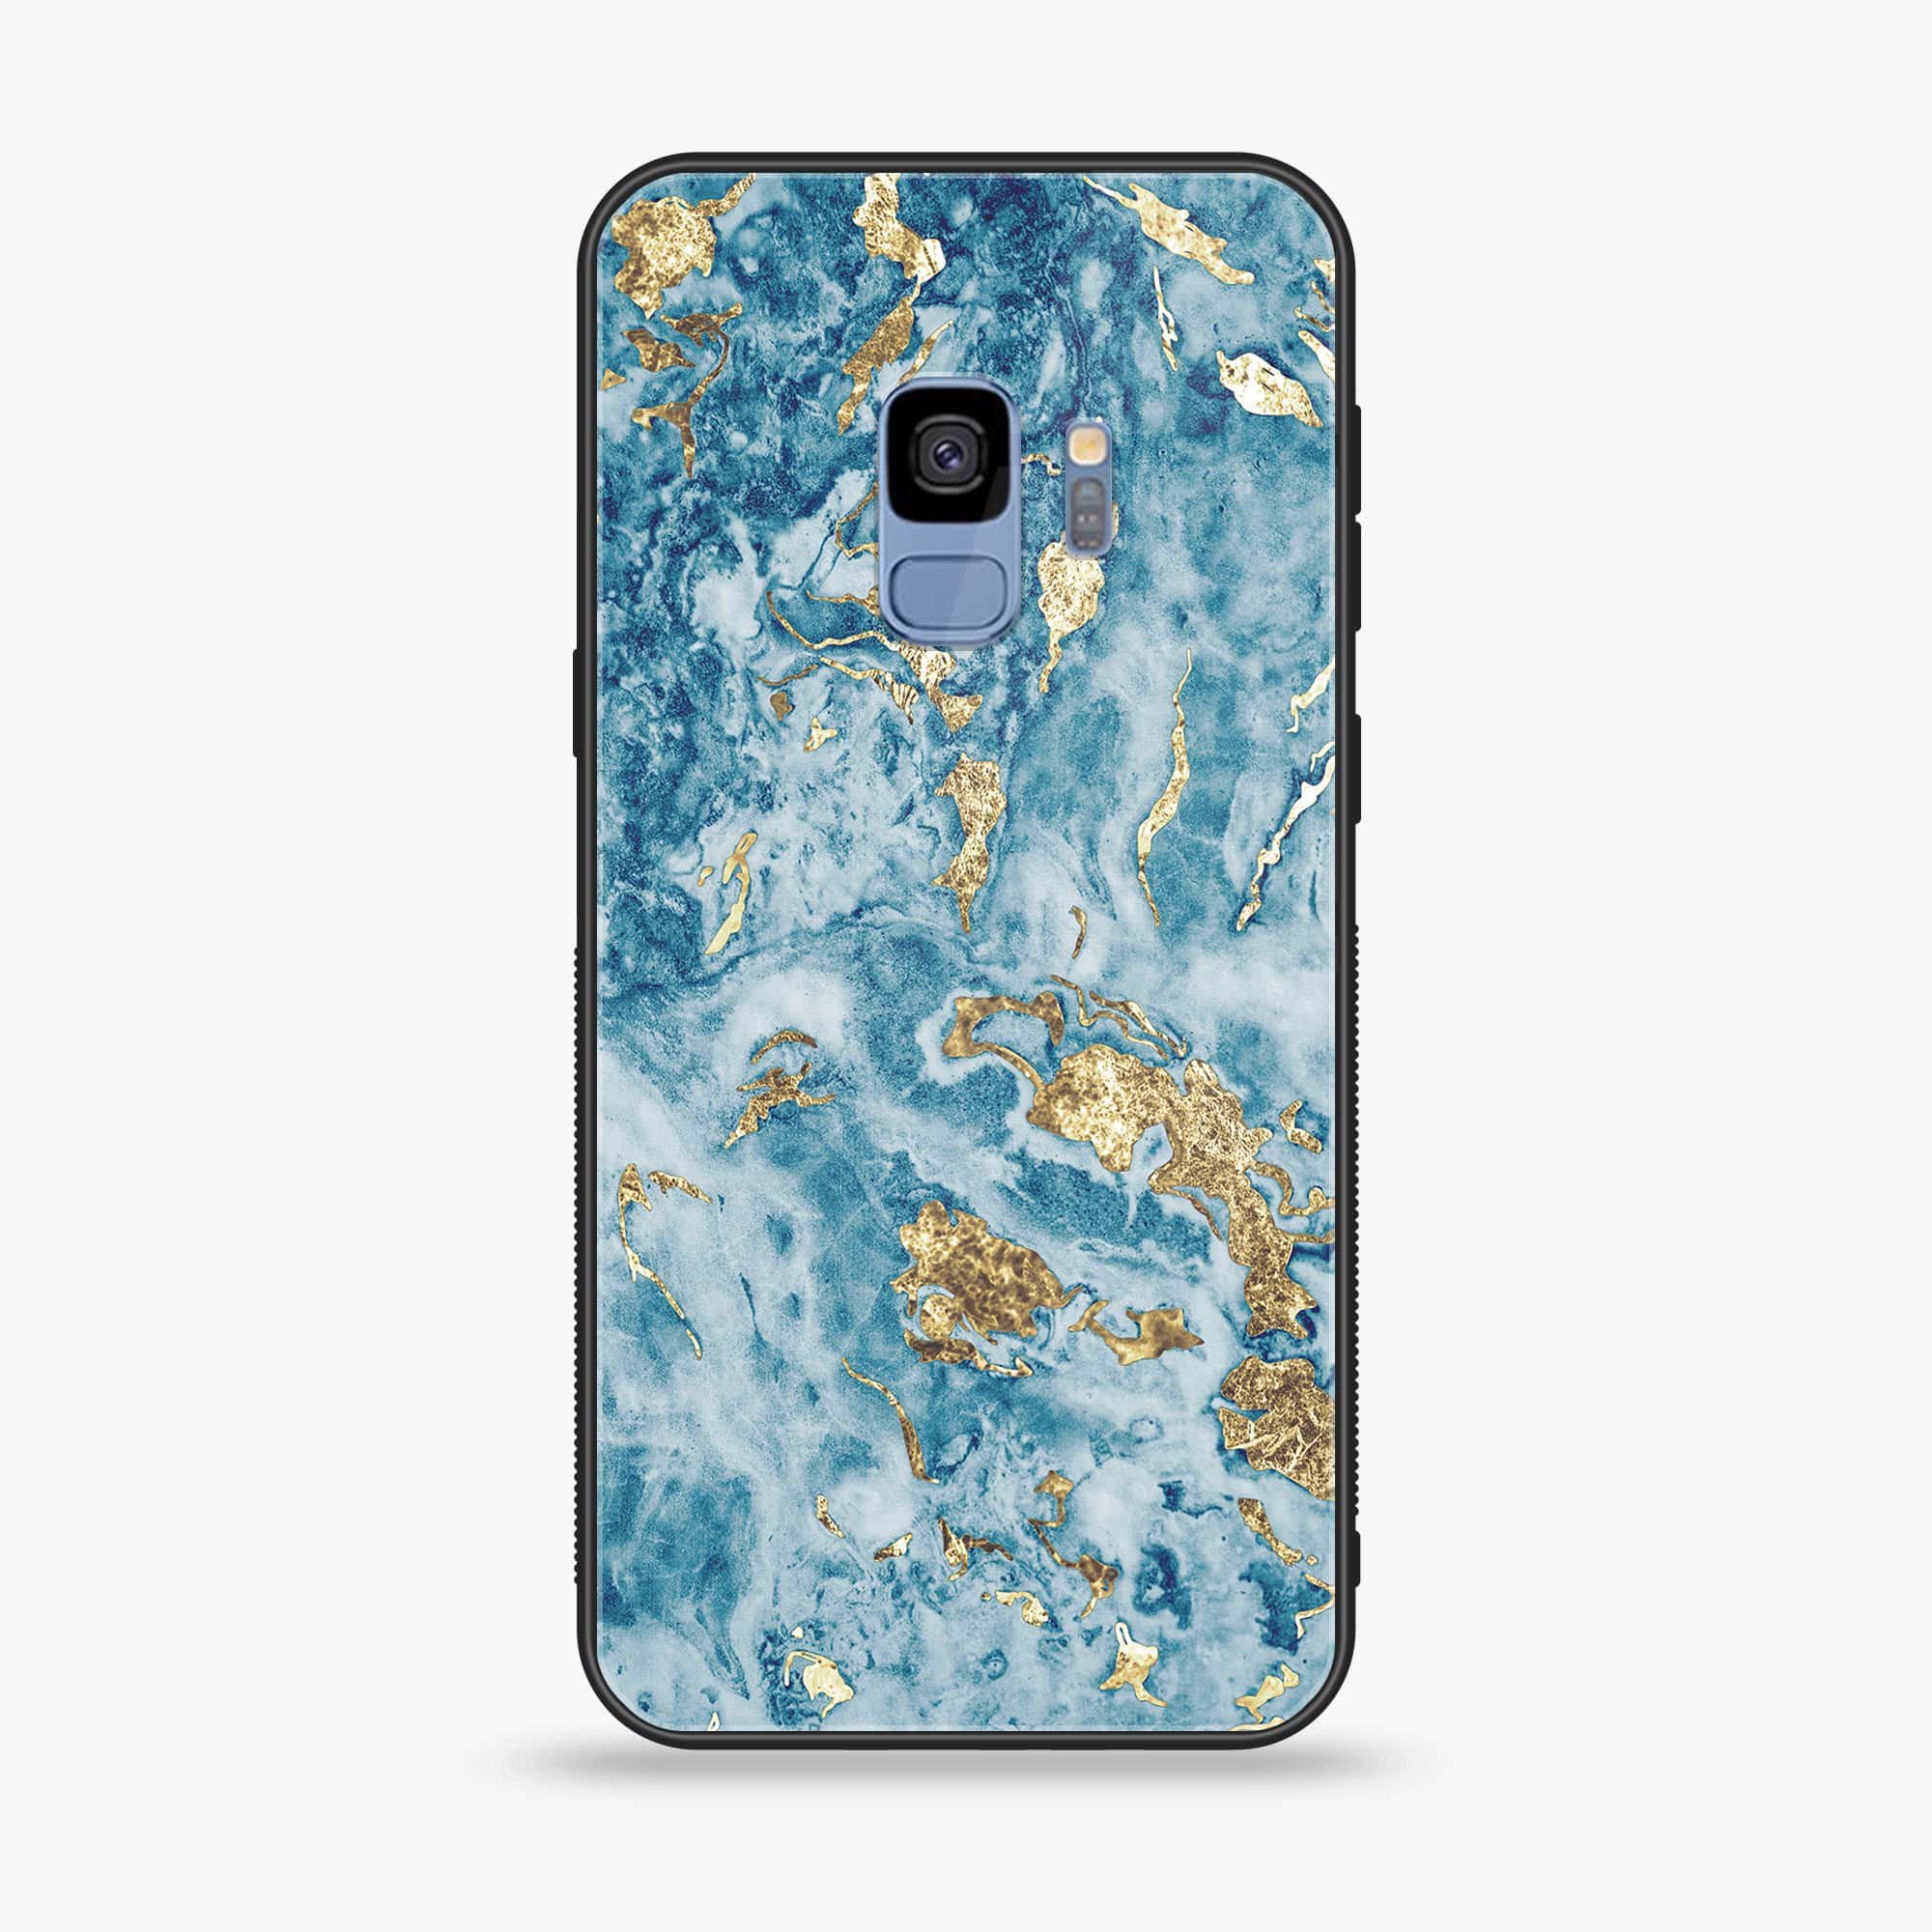 Galaxy S9 - Blue Marble Series V 2.0 - Premium Printed Glass soft Bumper shock Proof Case